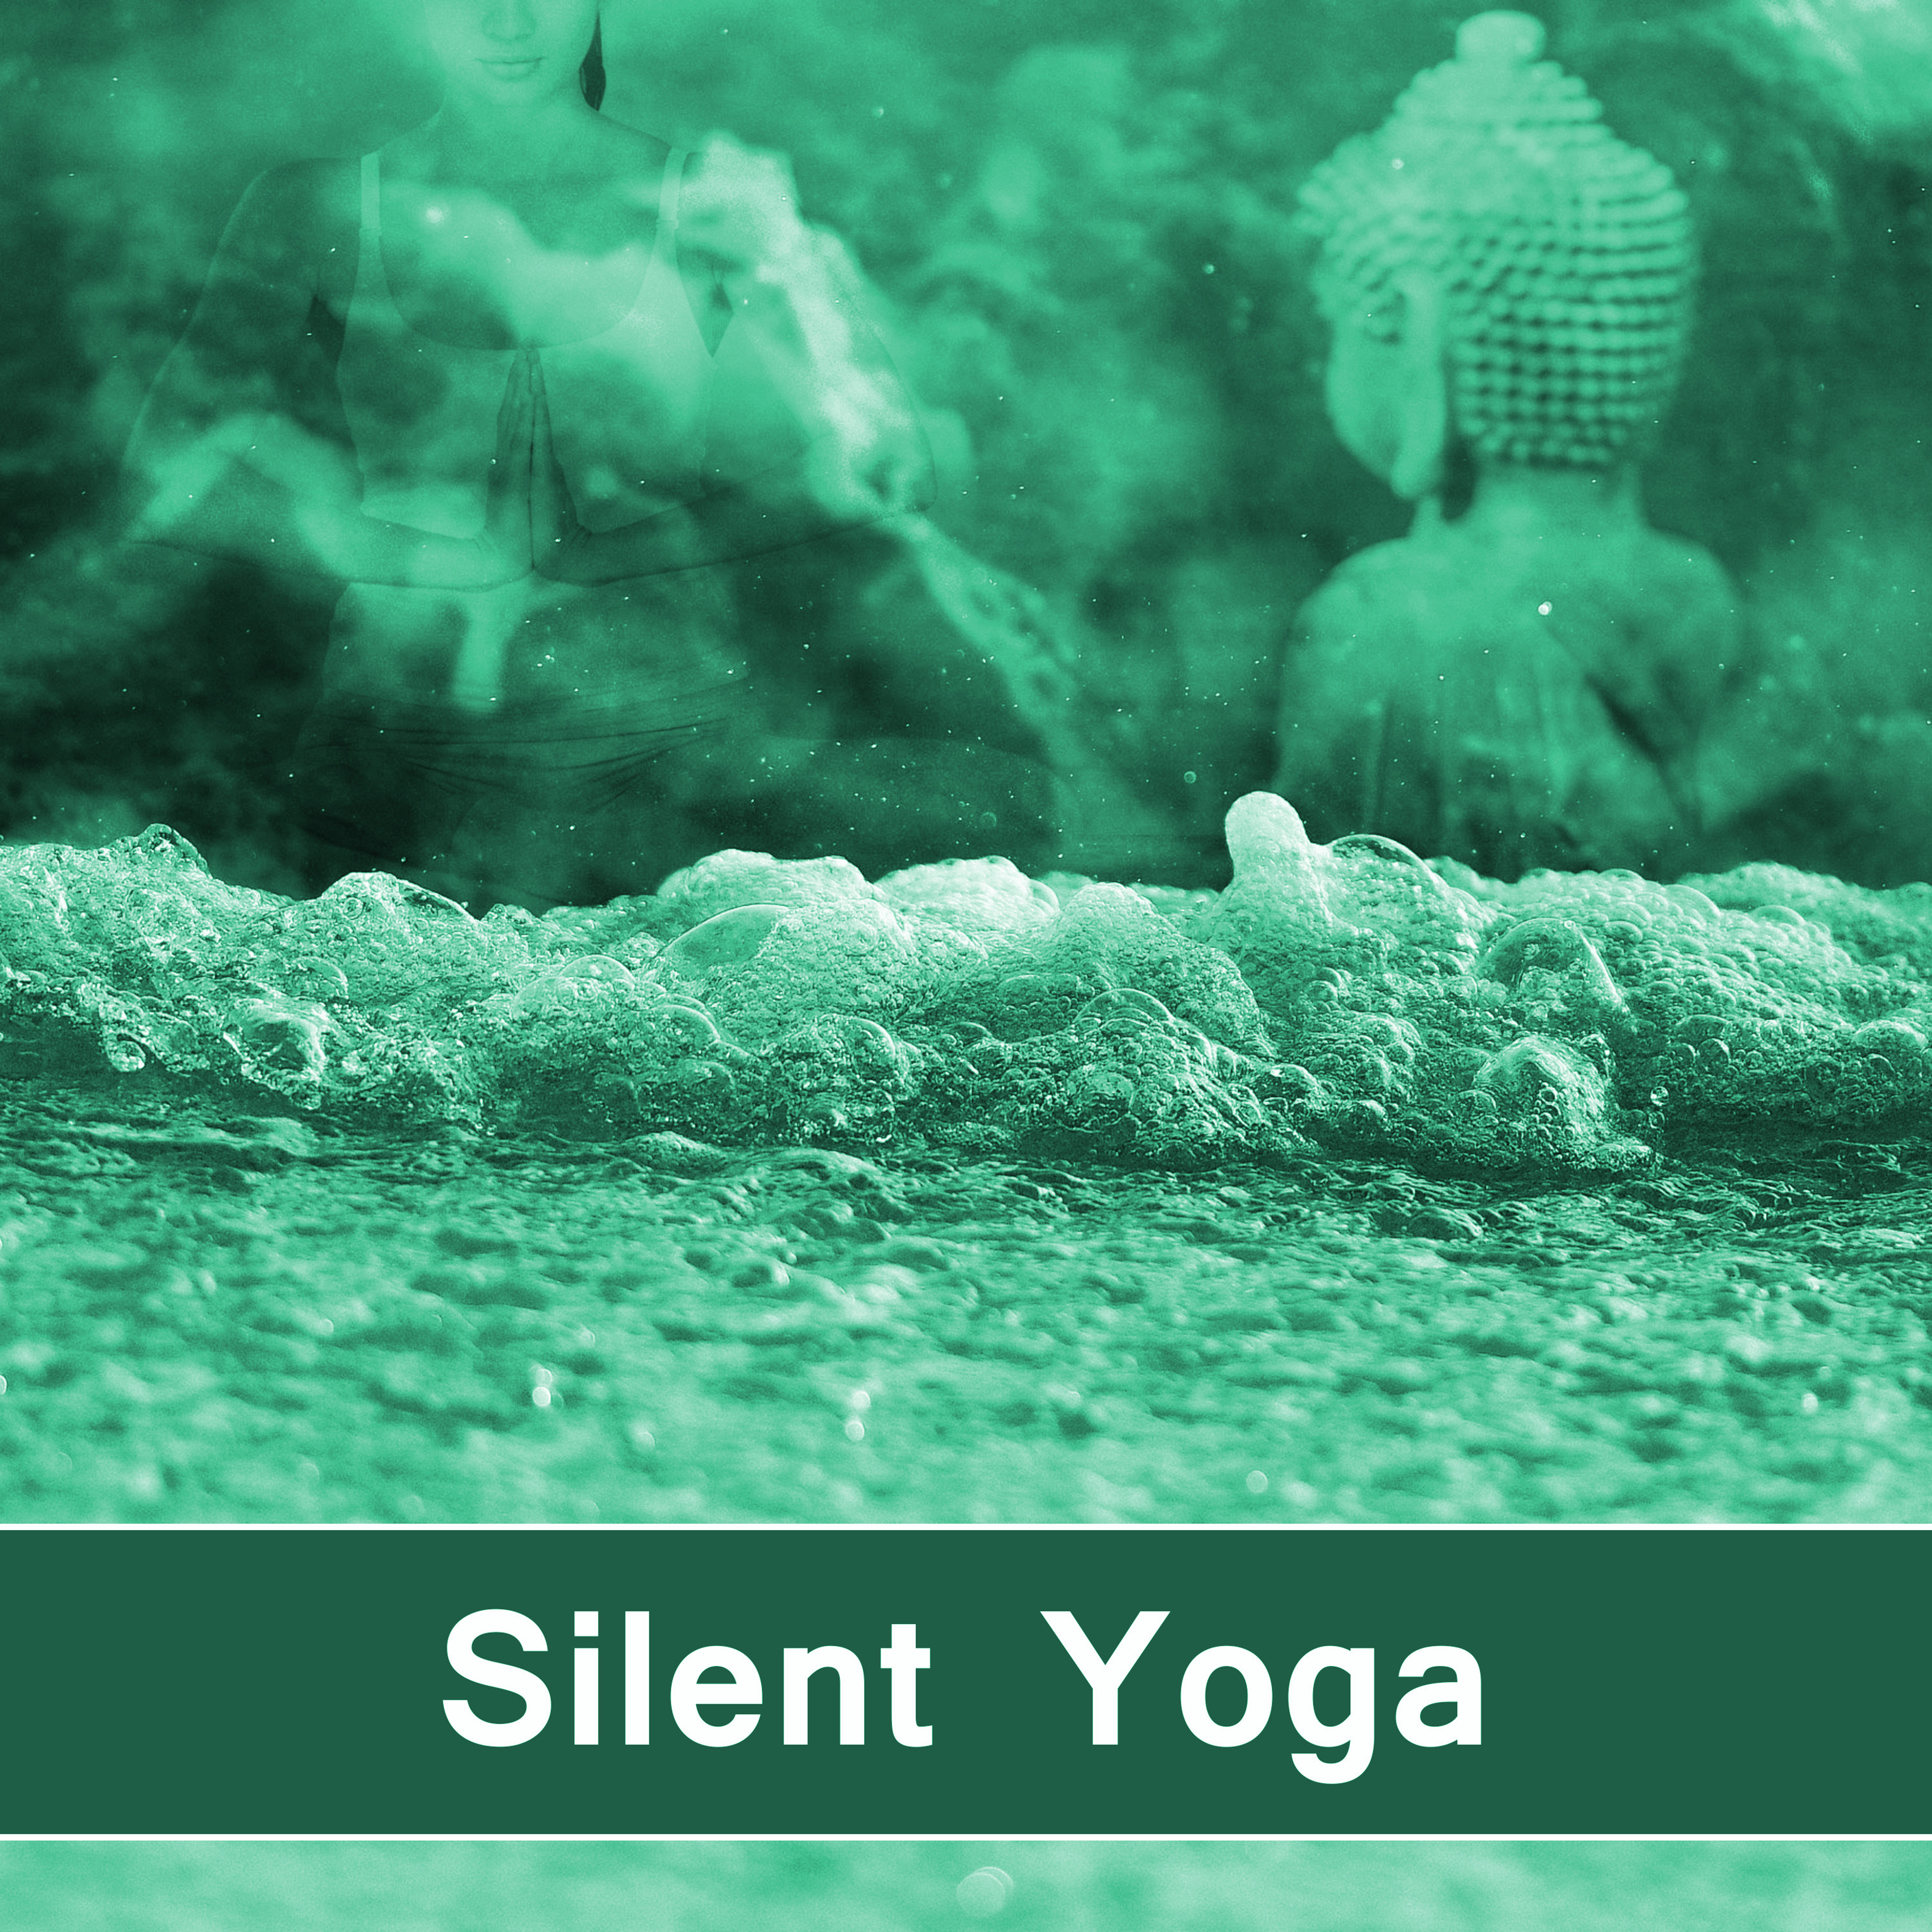 Silent Yoga – Meditation Music, Harmony & Concentration, Exercise Your Brain, Peaceful Mind, Calming Sounds